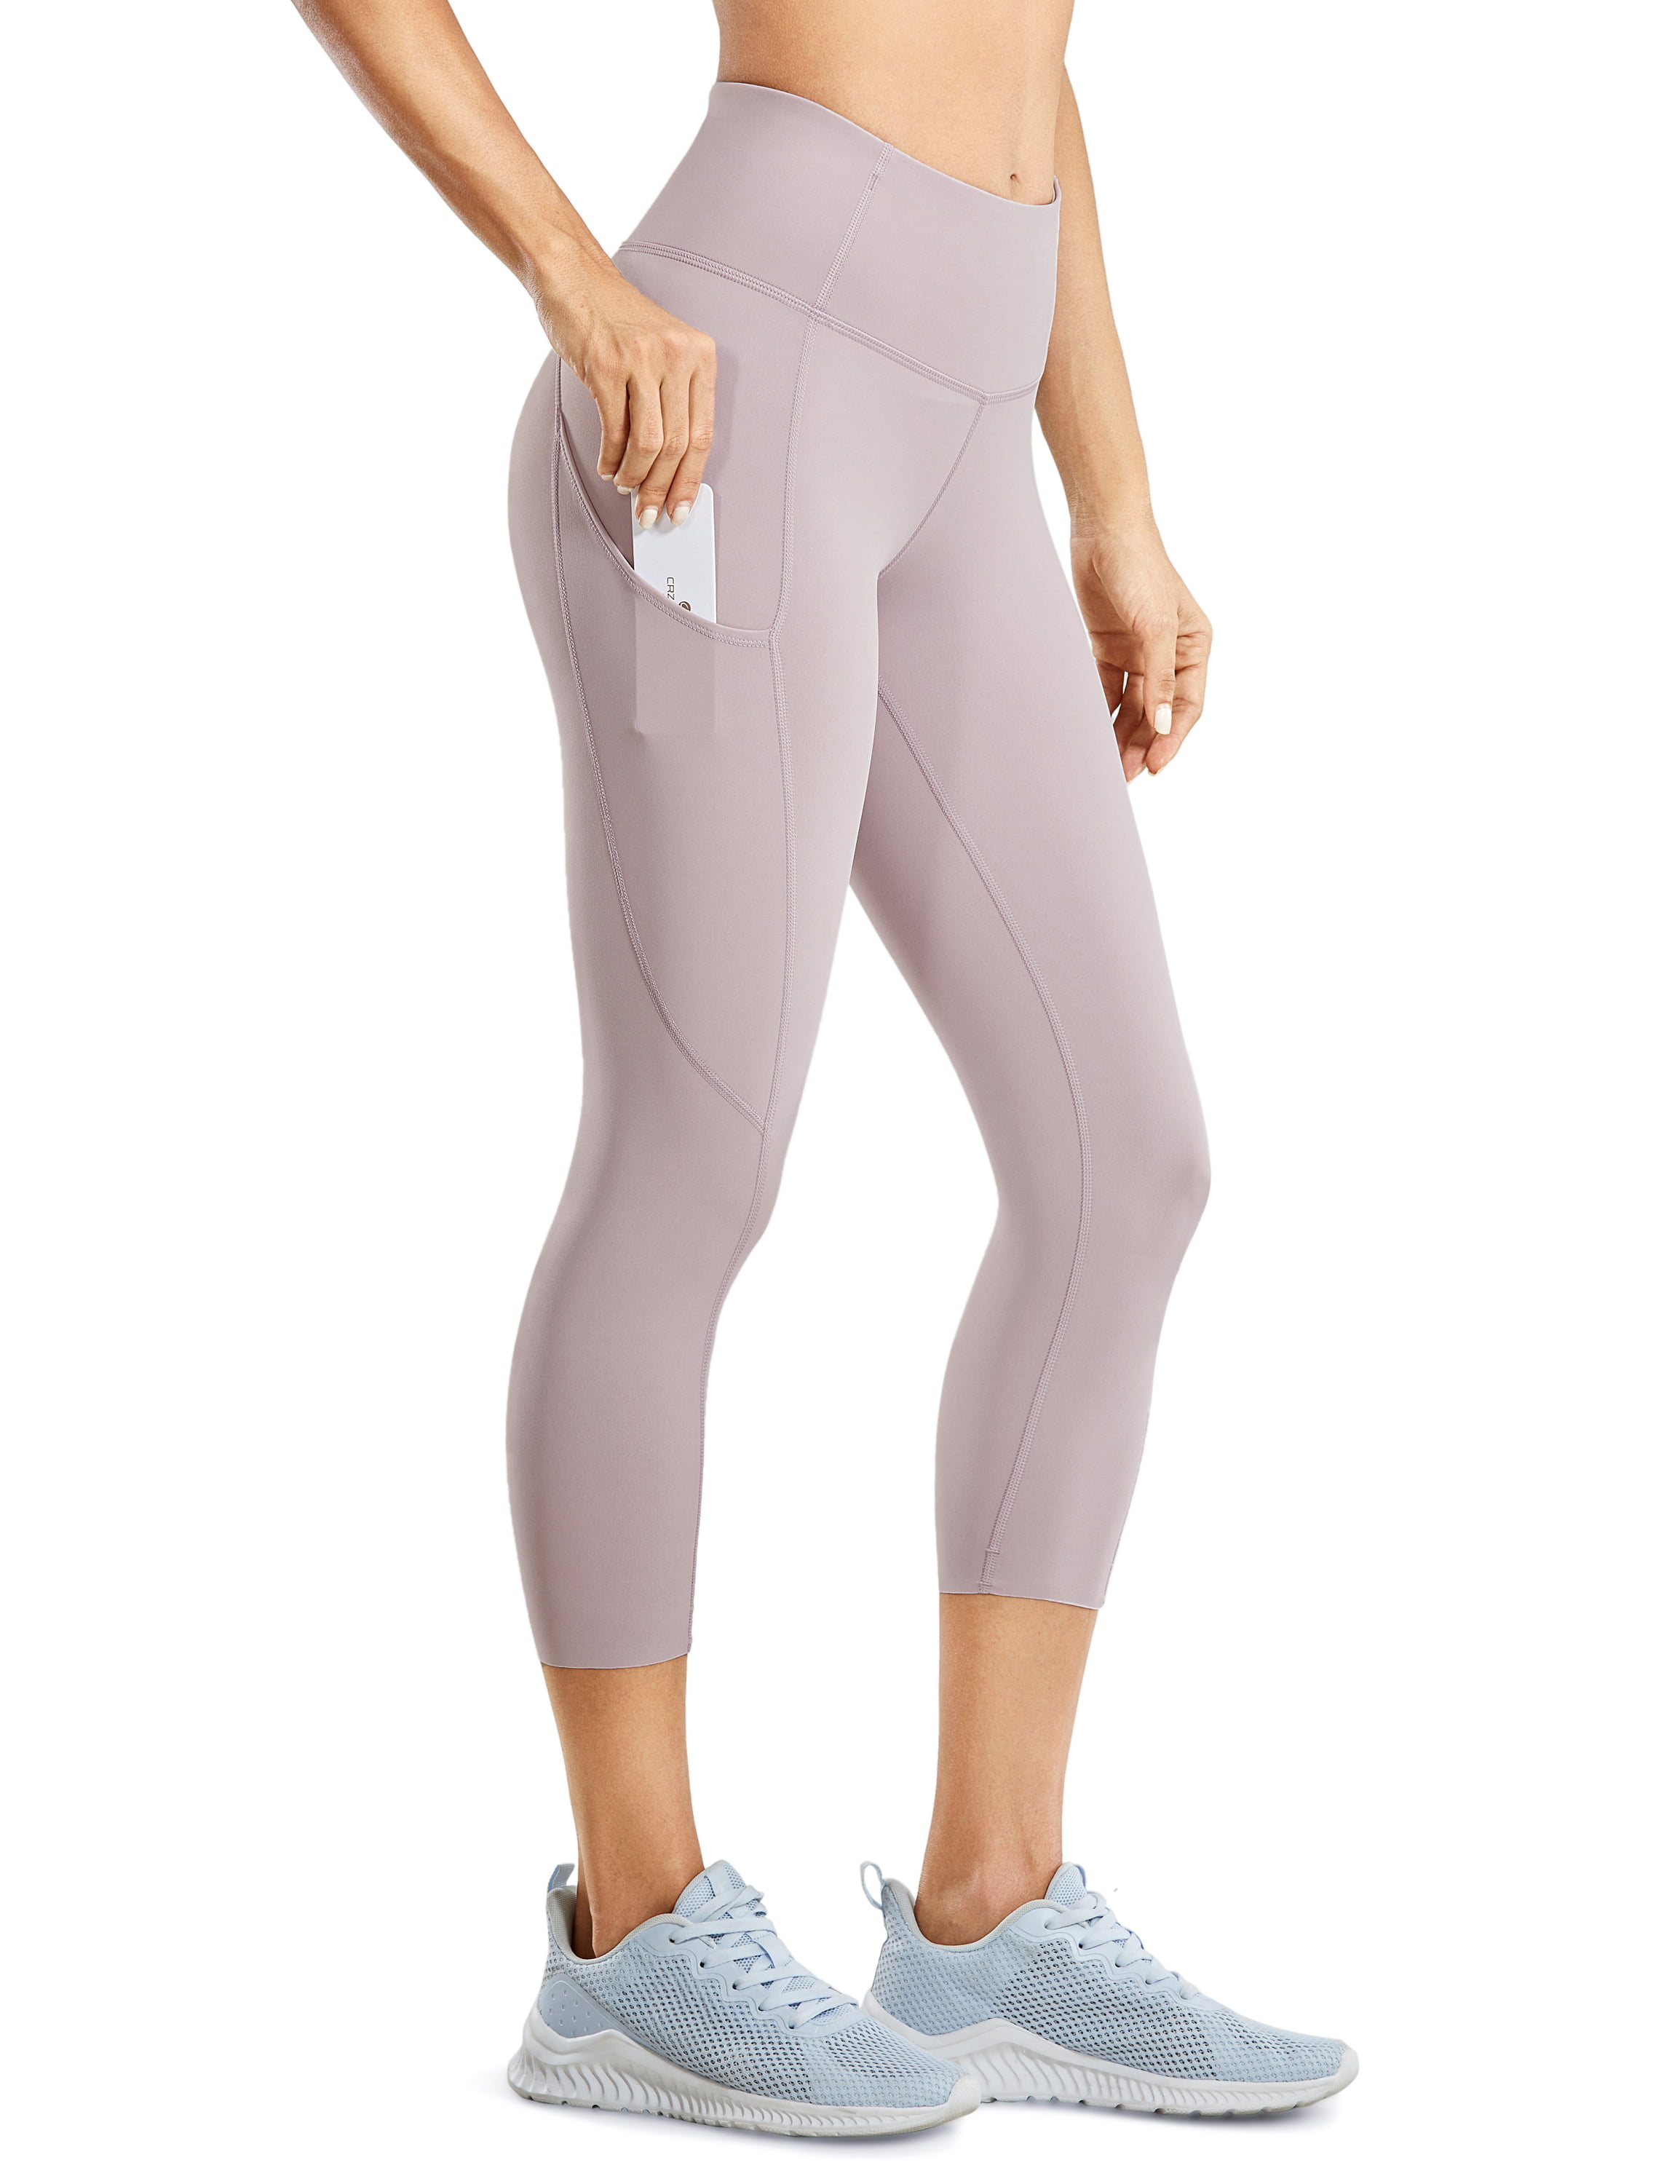 CRZ YOGA Women's Naked Feeling High Waist Gym Workout Capris Leggings with  Pockets - 19 Inches - Walmart.com